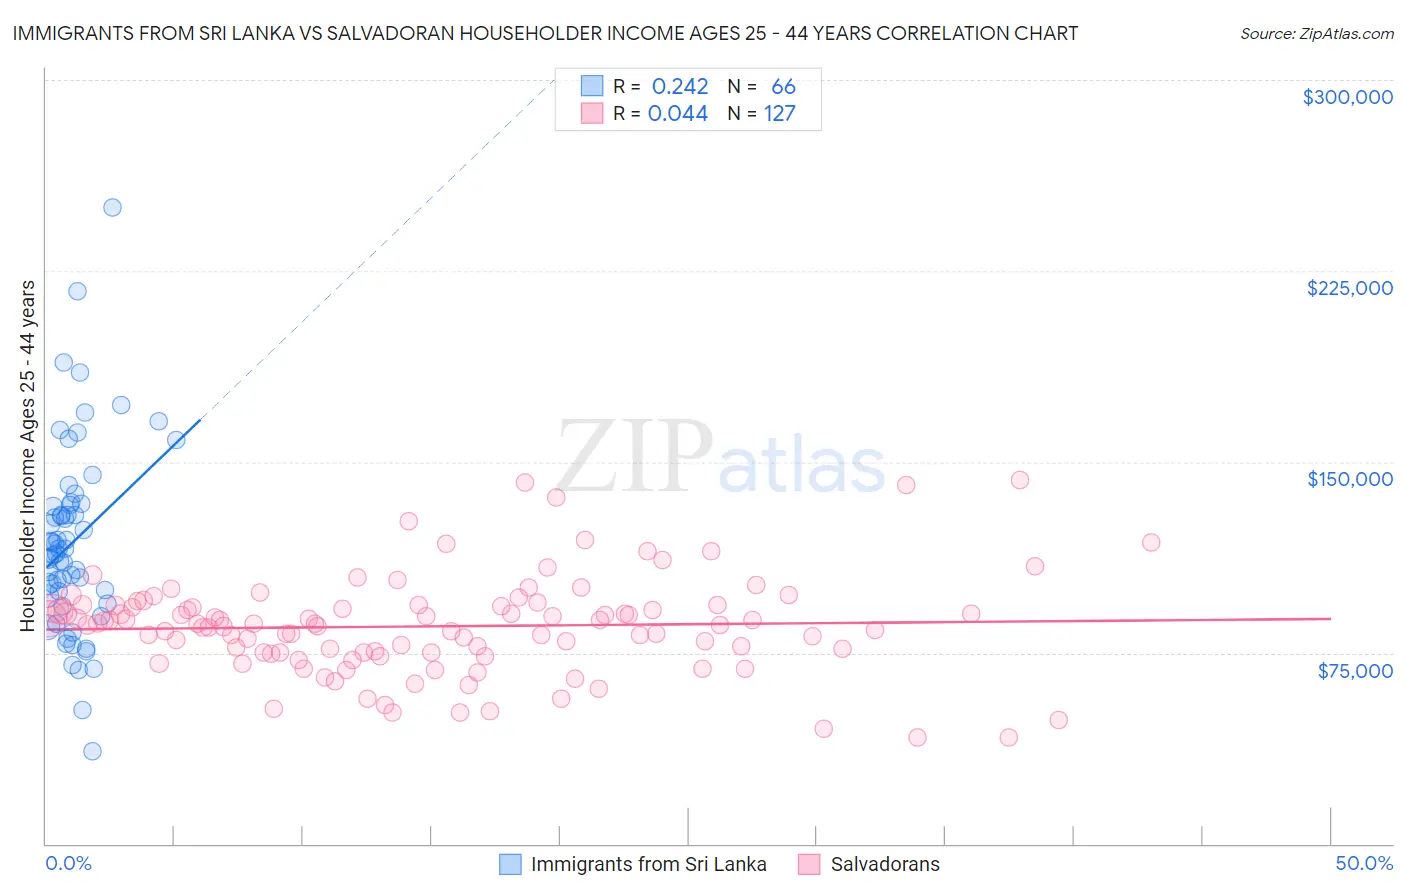 Immigrants from Sri Lanka vs Salvadoran Householder Income Ages 25 - 44 years